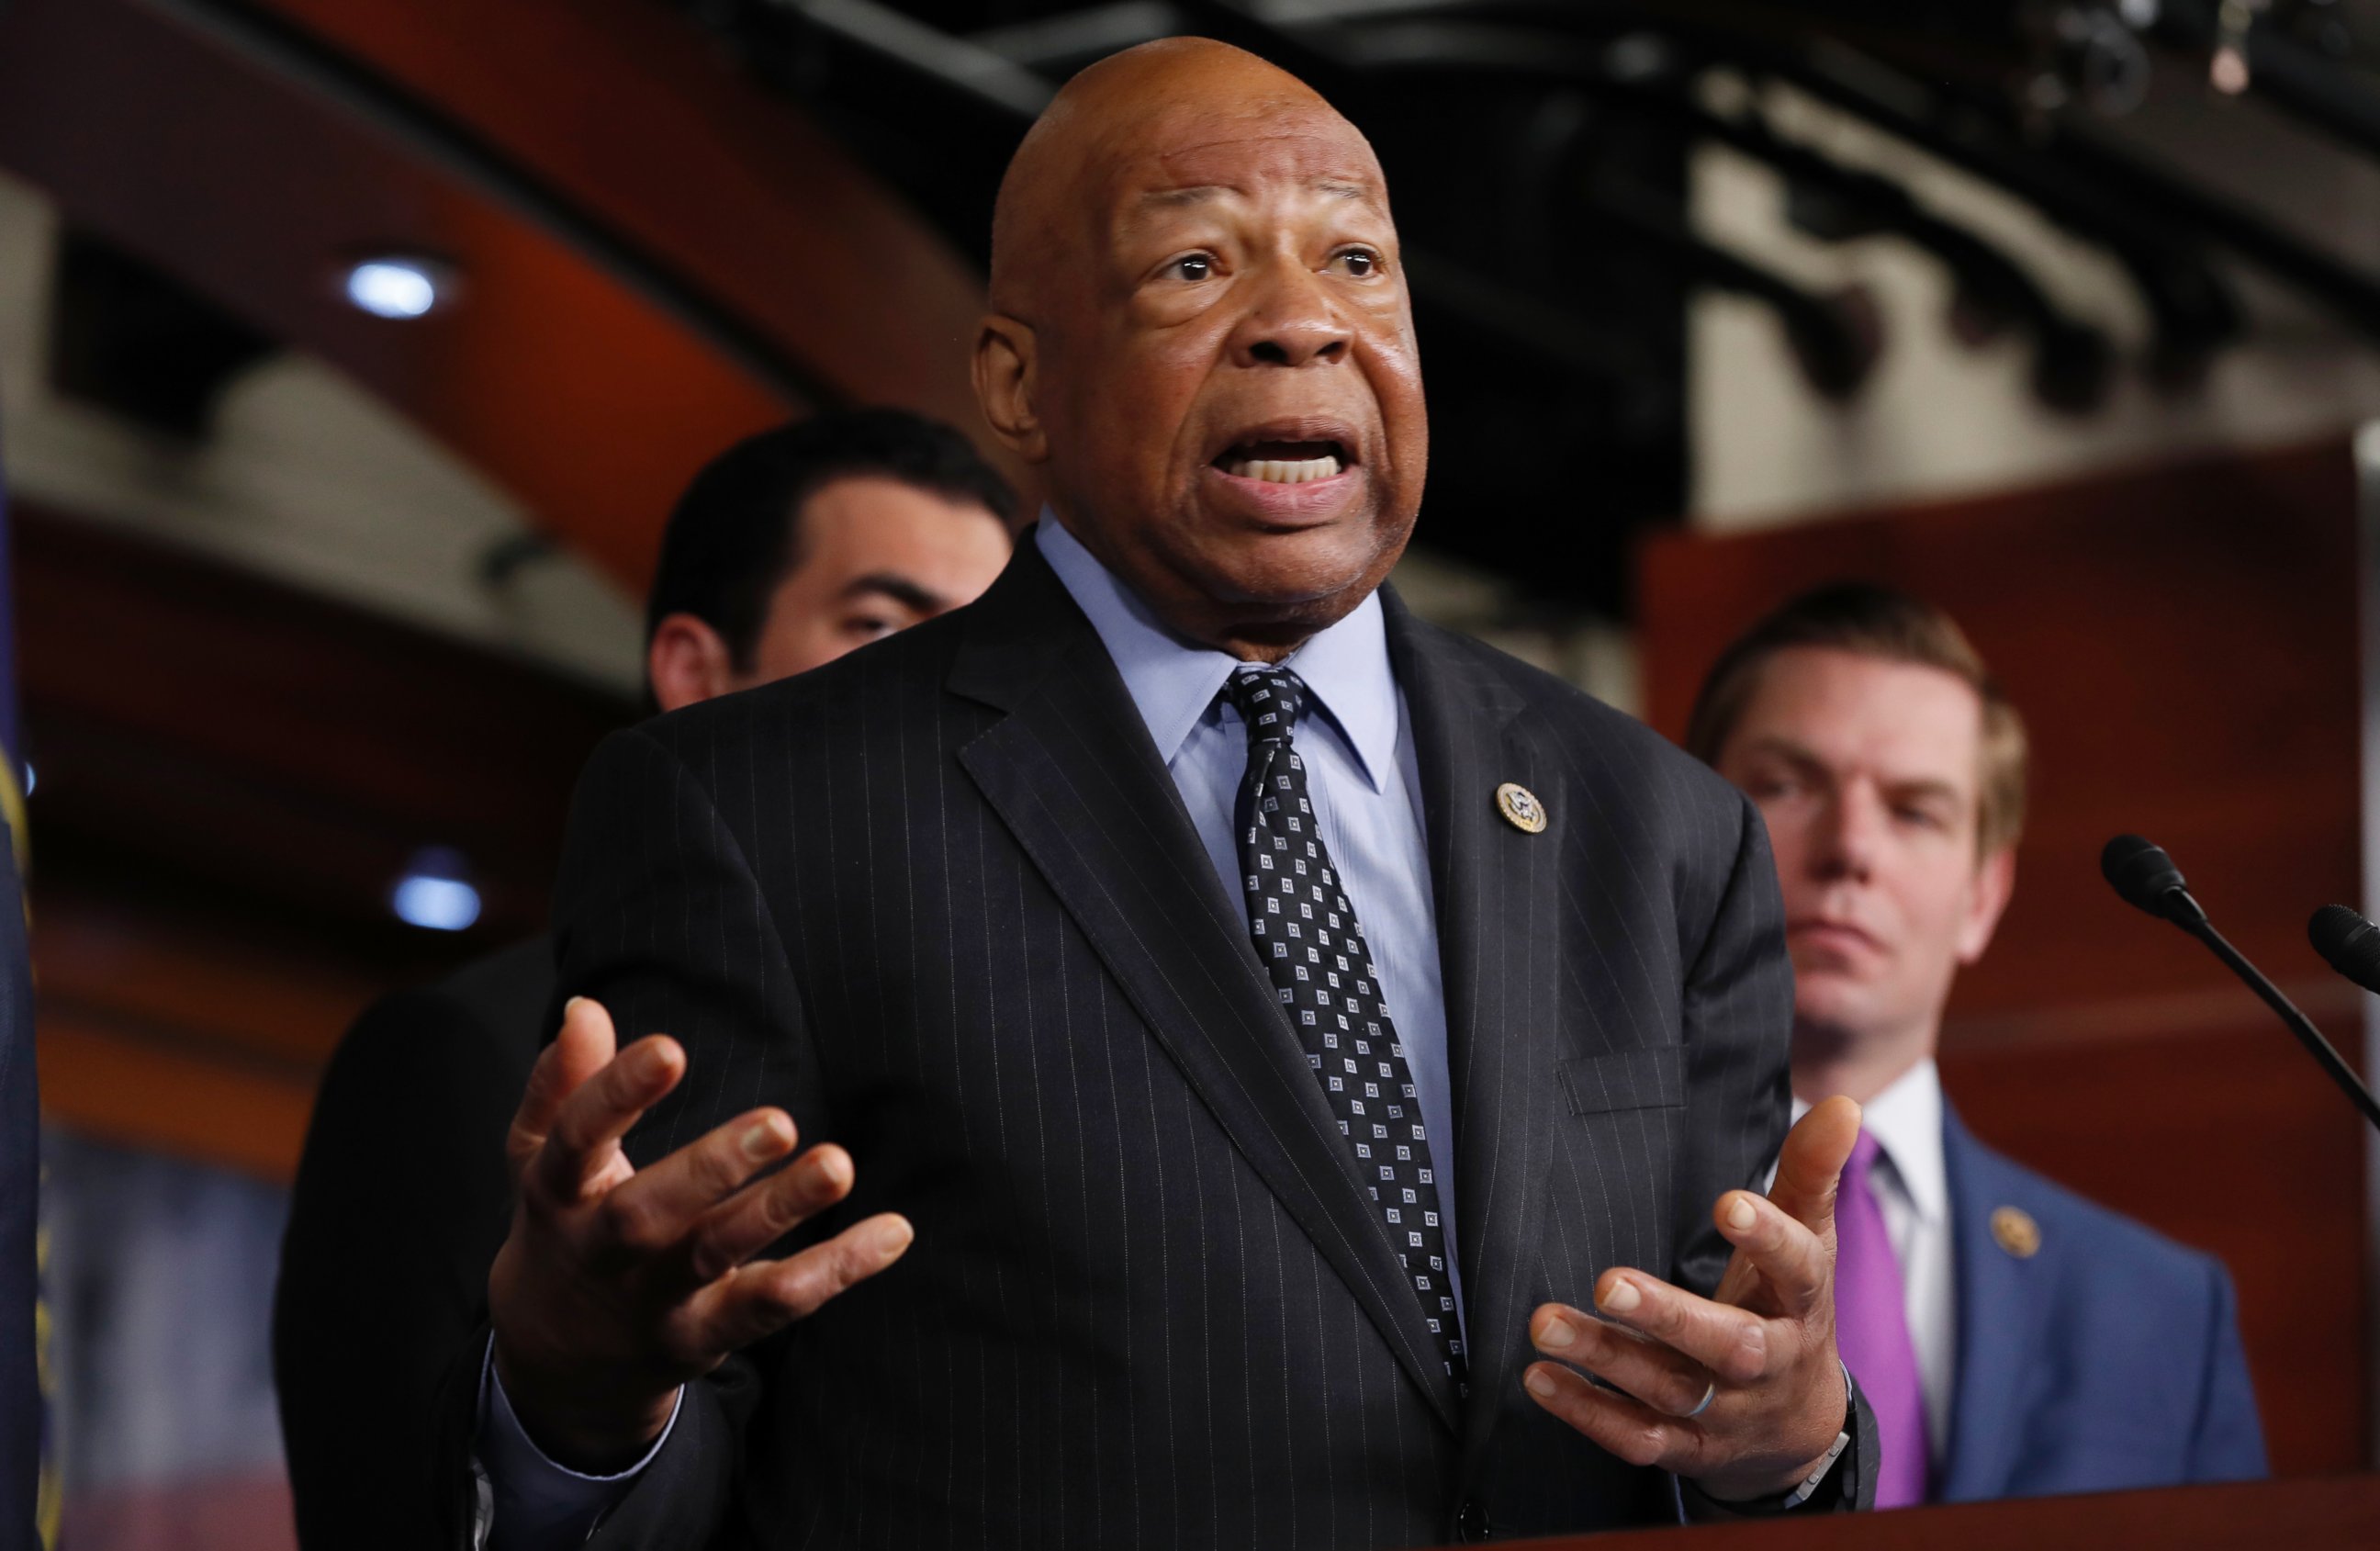 PHOTO: Rep. Elijah Cummings, ranking member on the House Oversight and Government Reform Committee, speaks during a news conference on Capitol Hill in Washington, May 17, 2017.